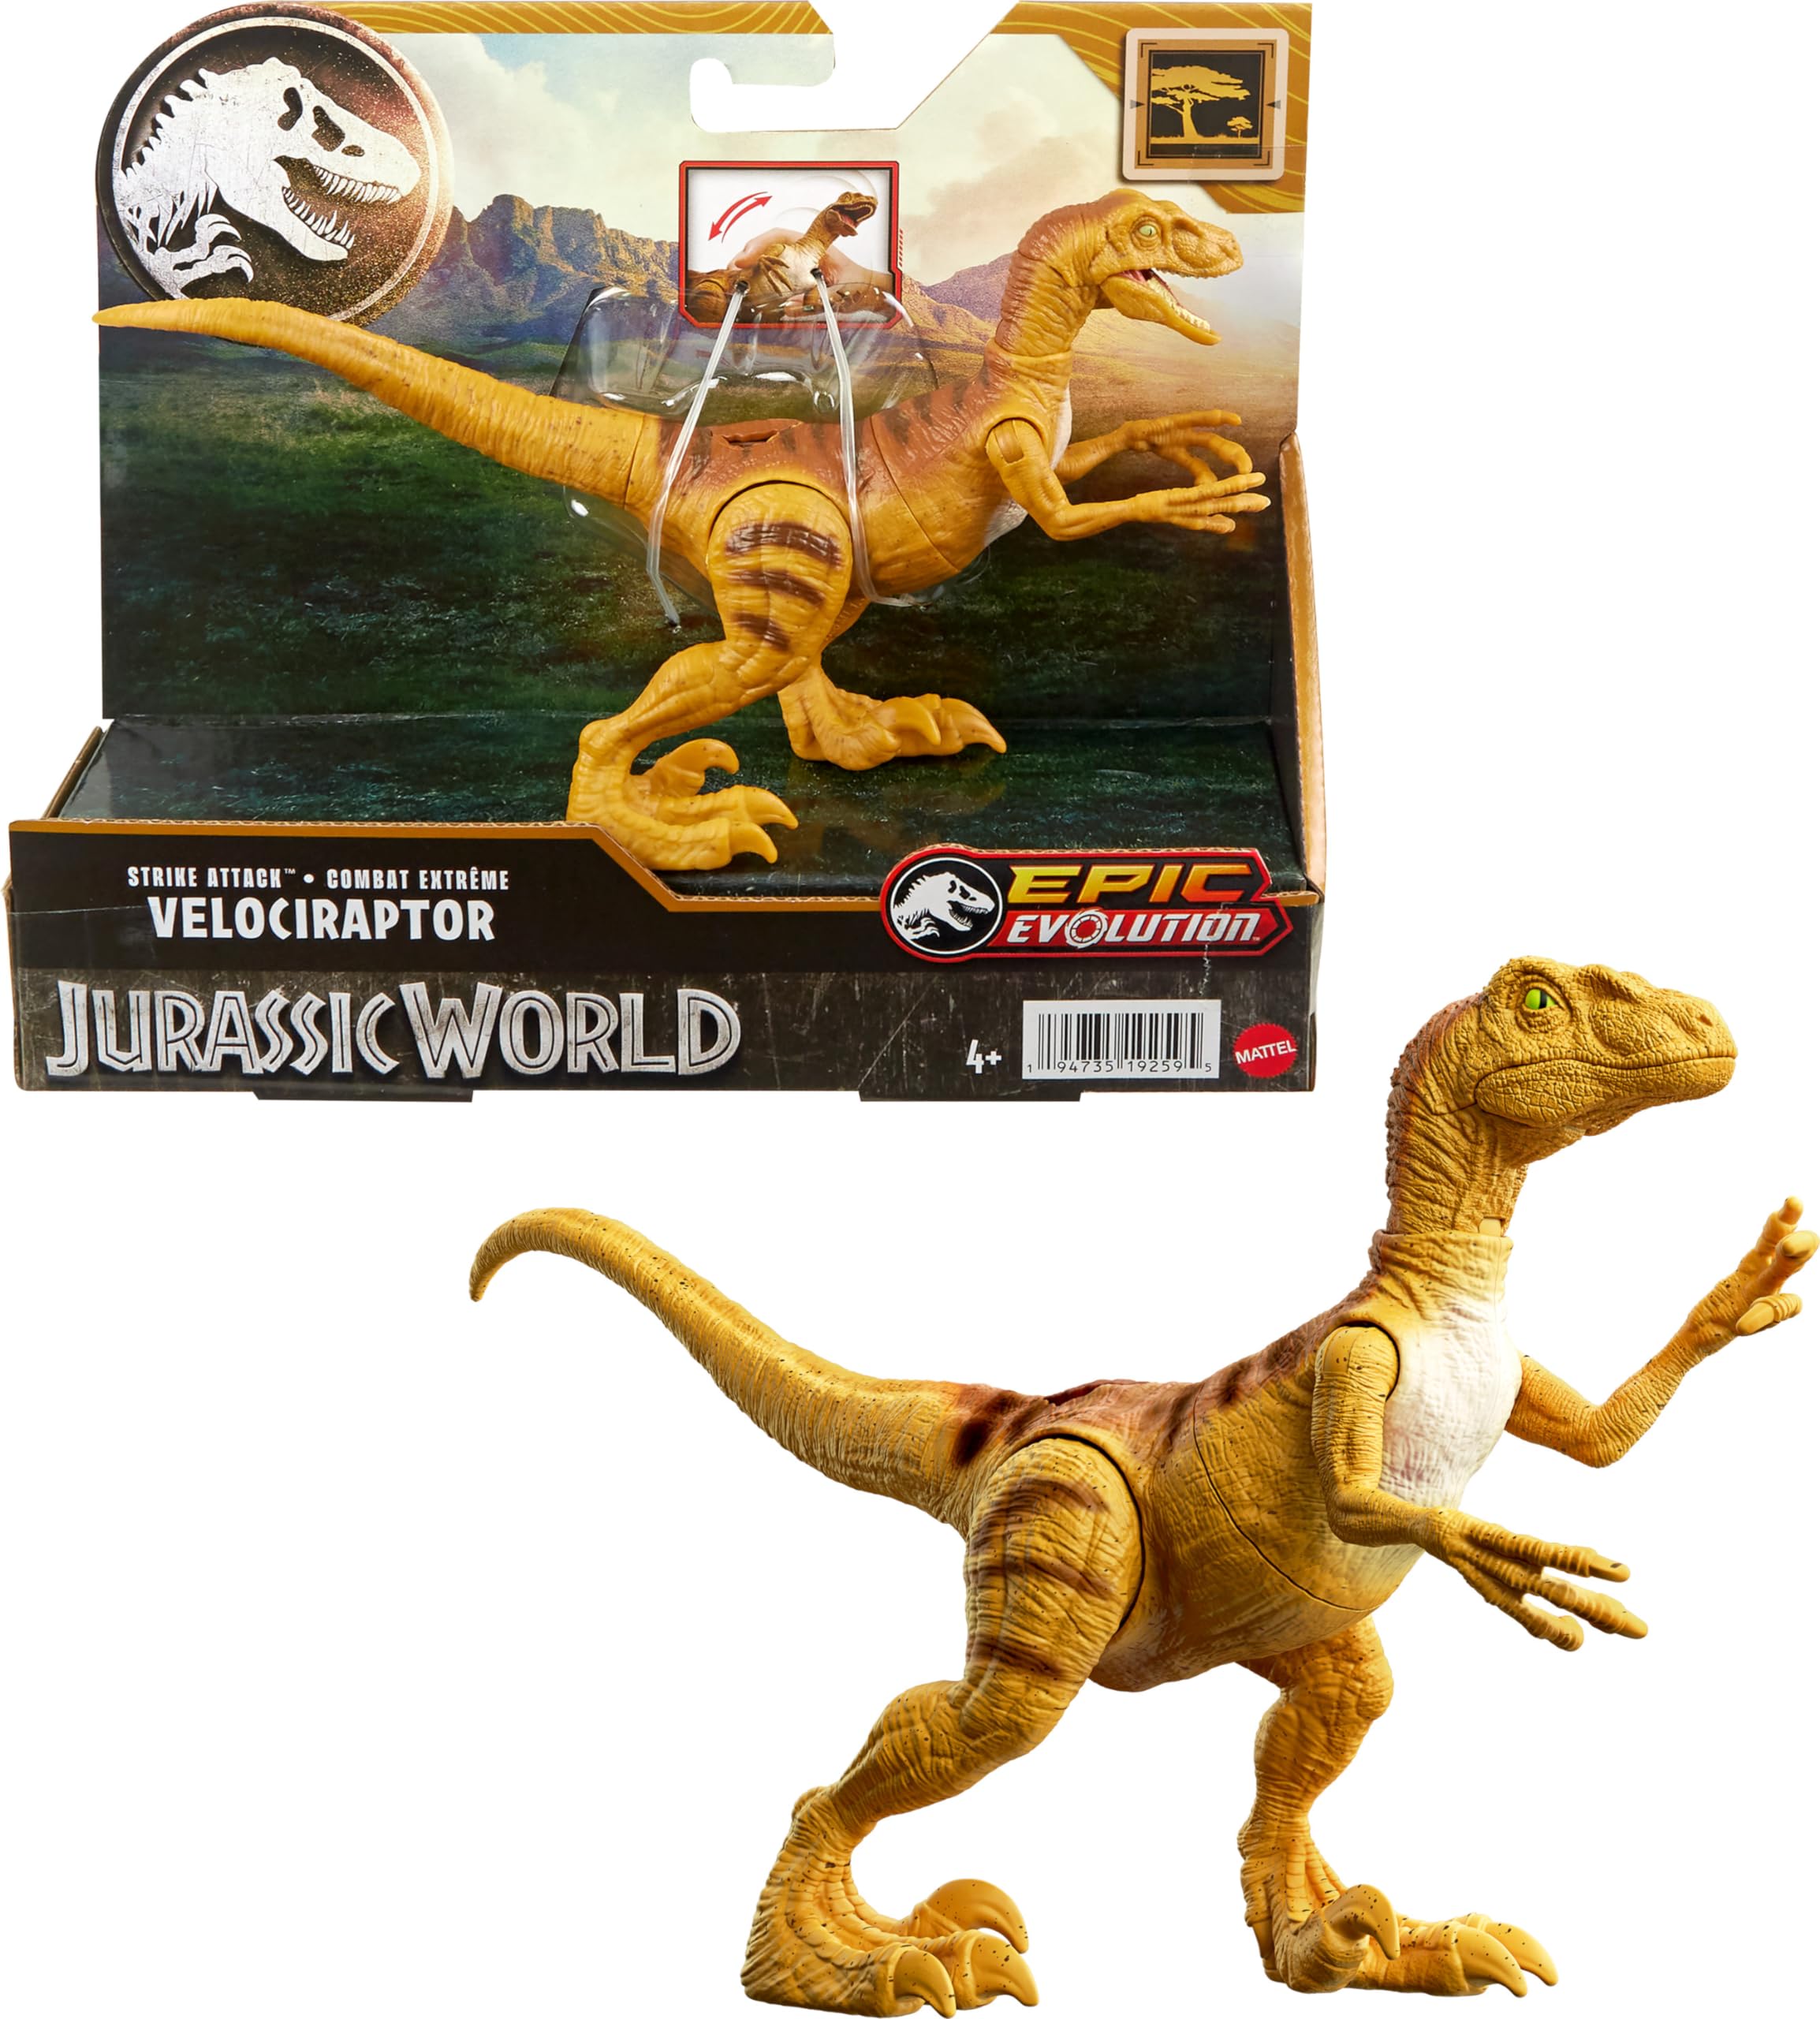 Jurassic World Strike Attack Dinosaur Toy with Single Strike Action, Movable Joints, Action Figure Gift with Physical & Digital Play